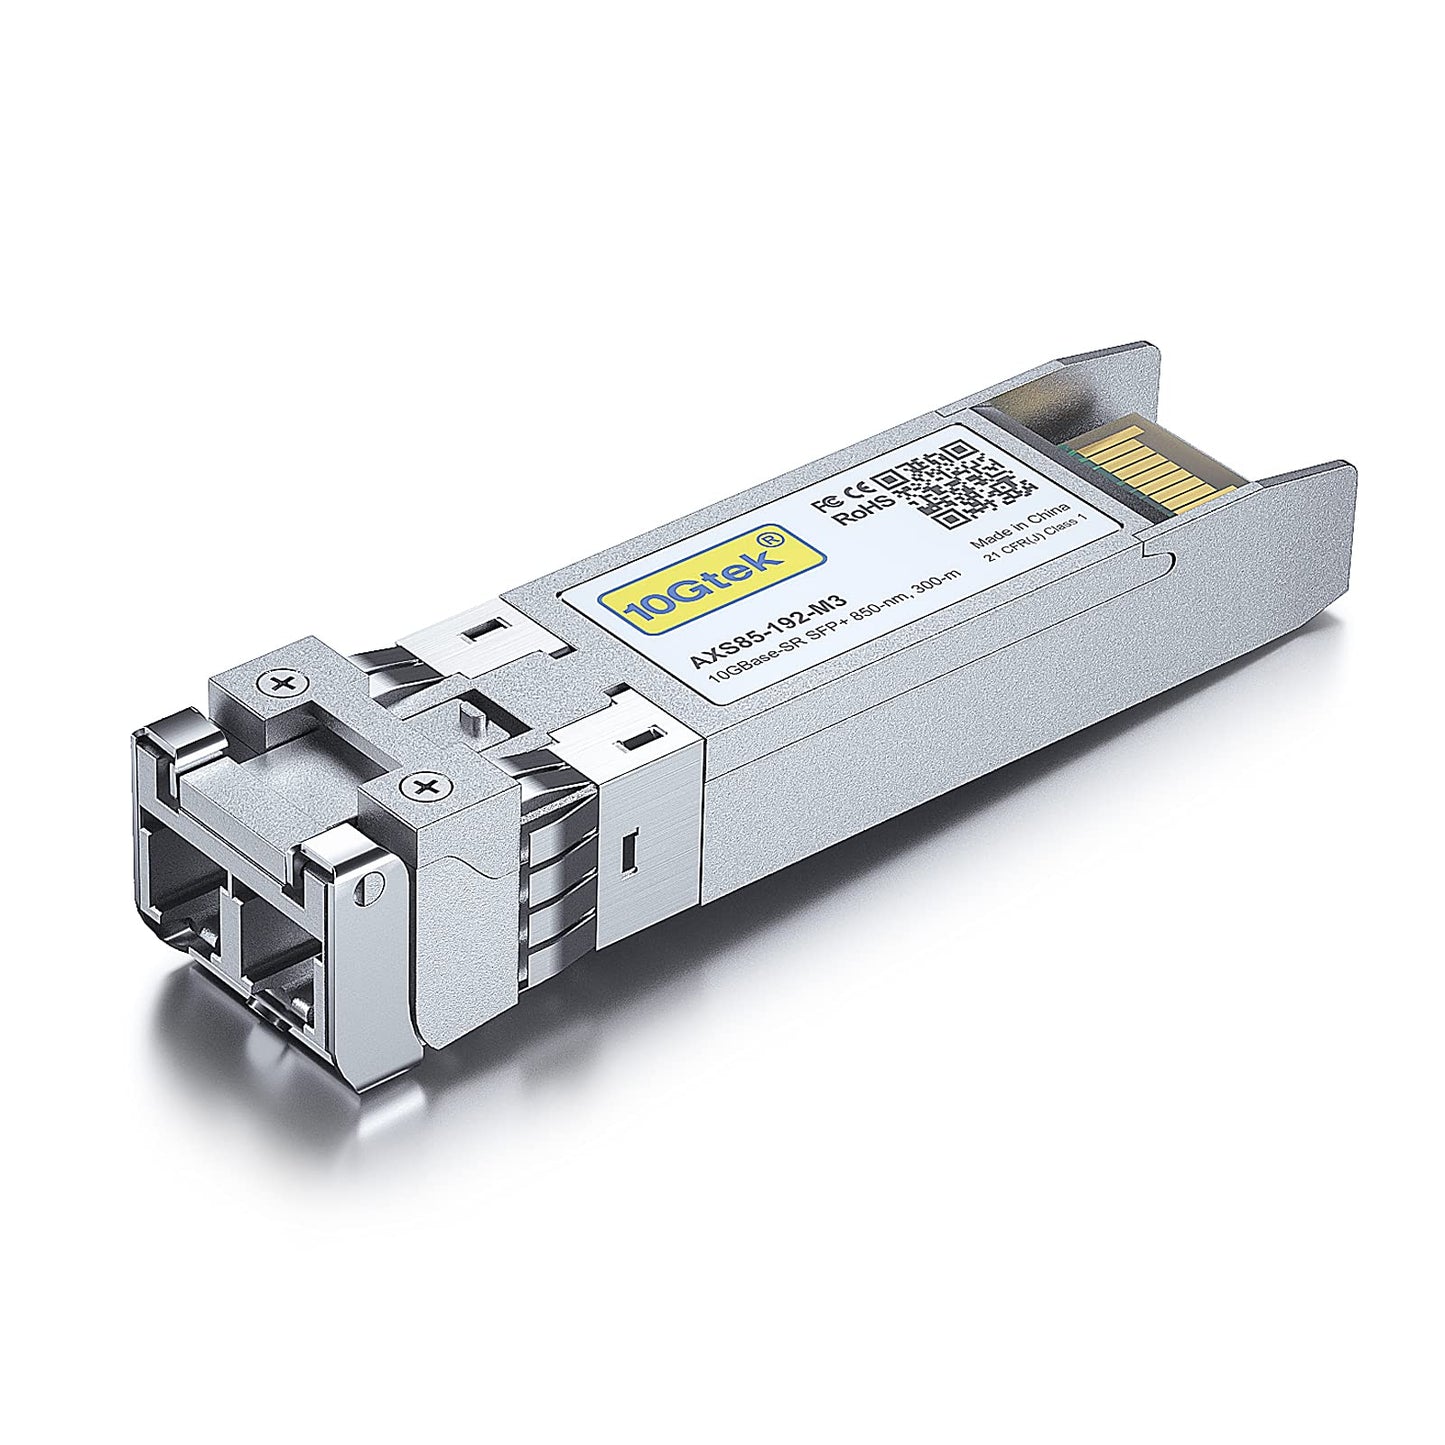 10GBase-SR SFP+ Transceiver, 10G 850nm MMF, up to 300 Meters, Compatible with Cisco SFP-10G-SR, Meraki MA-SFP-10GB-SR, and More, Pack of 2